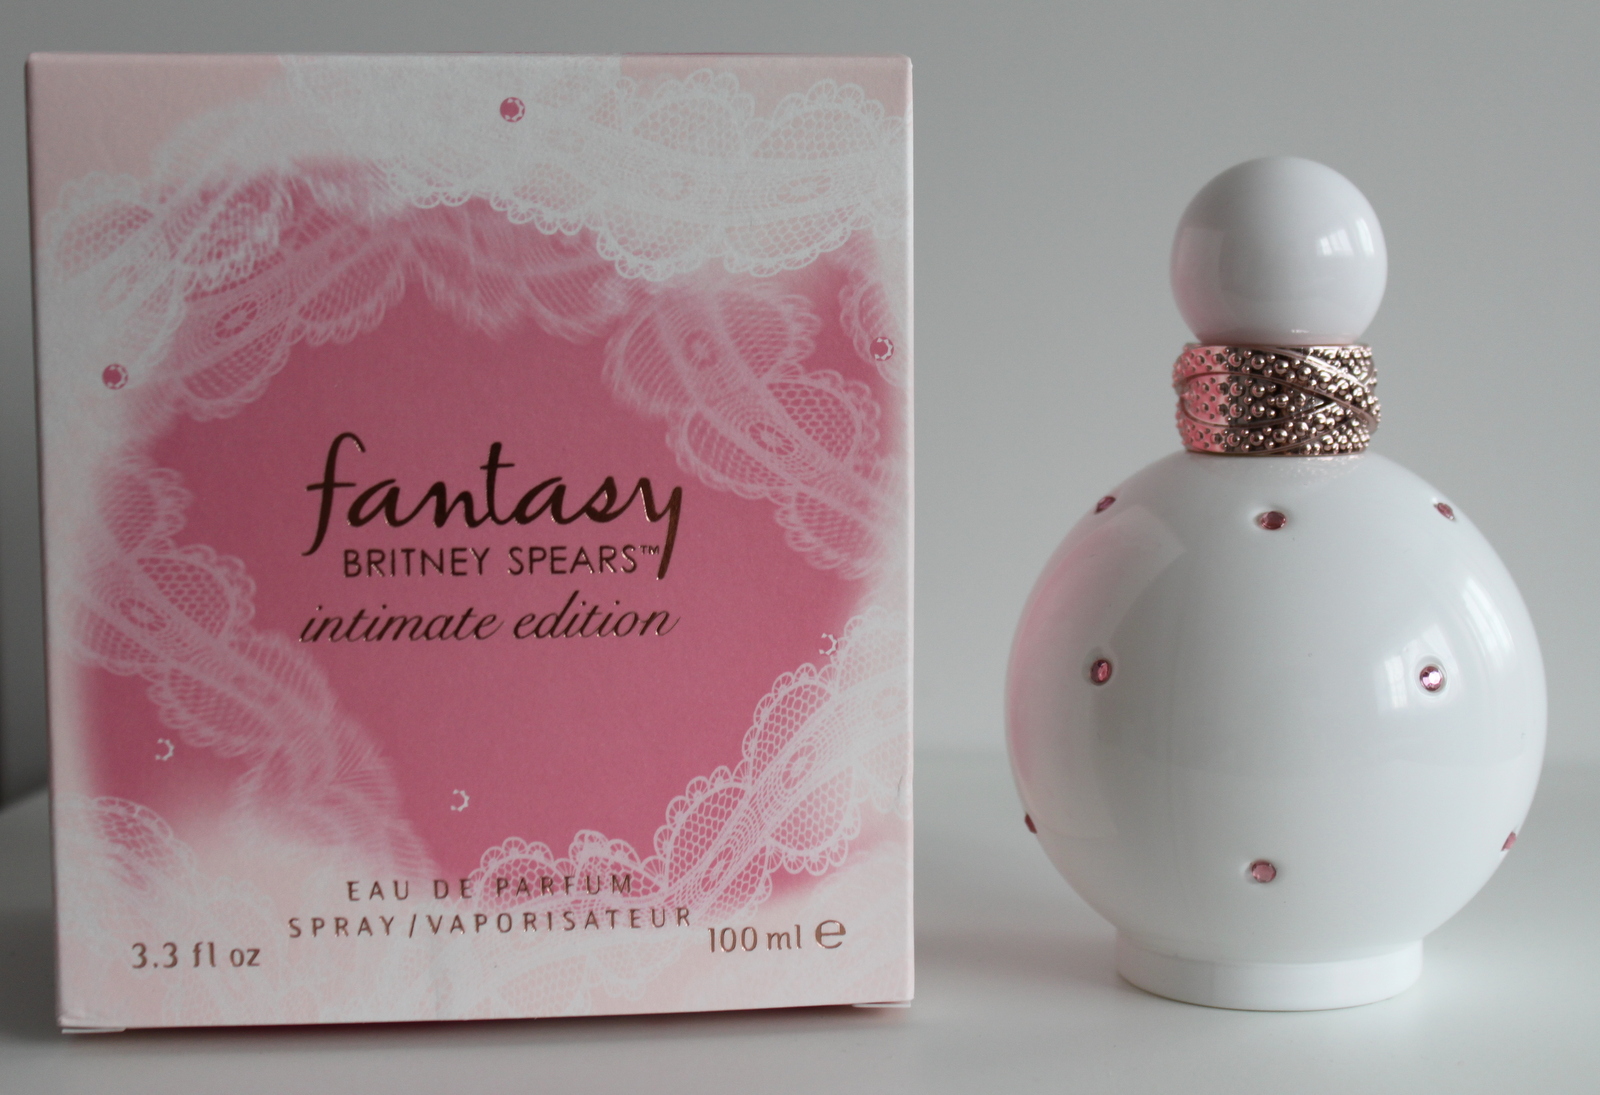 Angelsbeautylove Britney Spears Fantasy Intimate Edition Edp Review